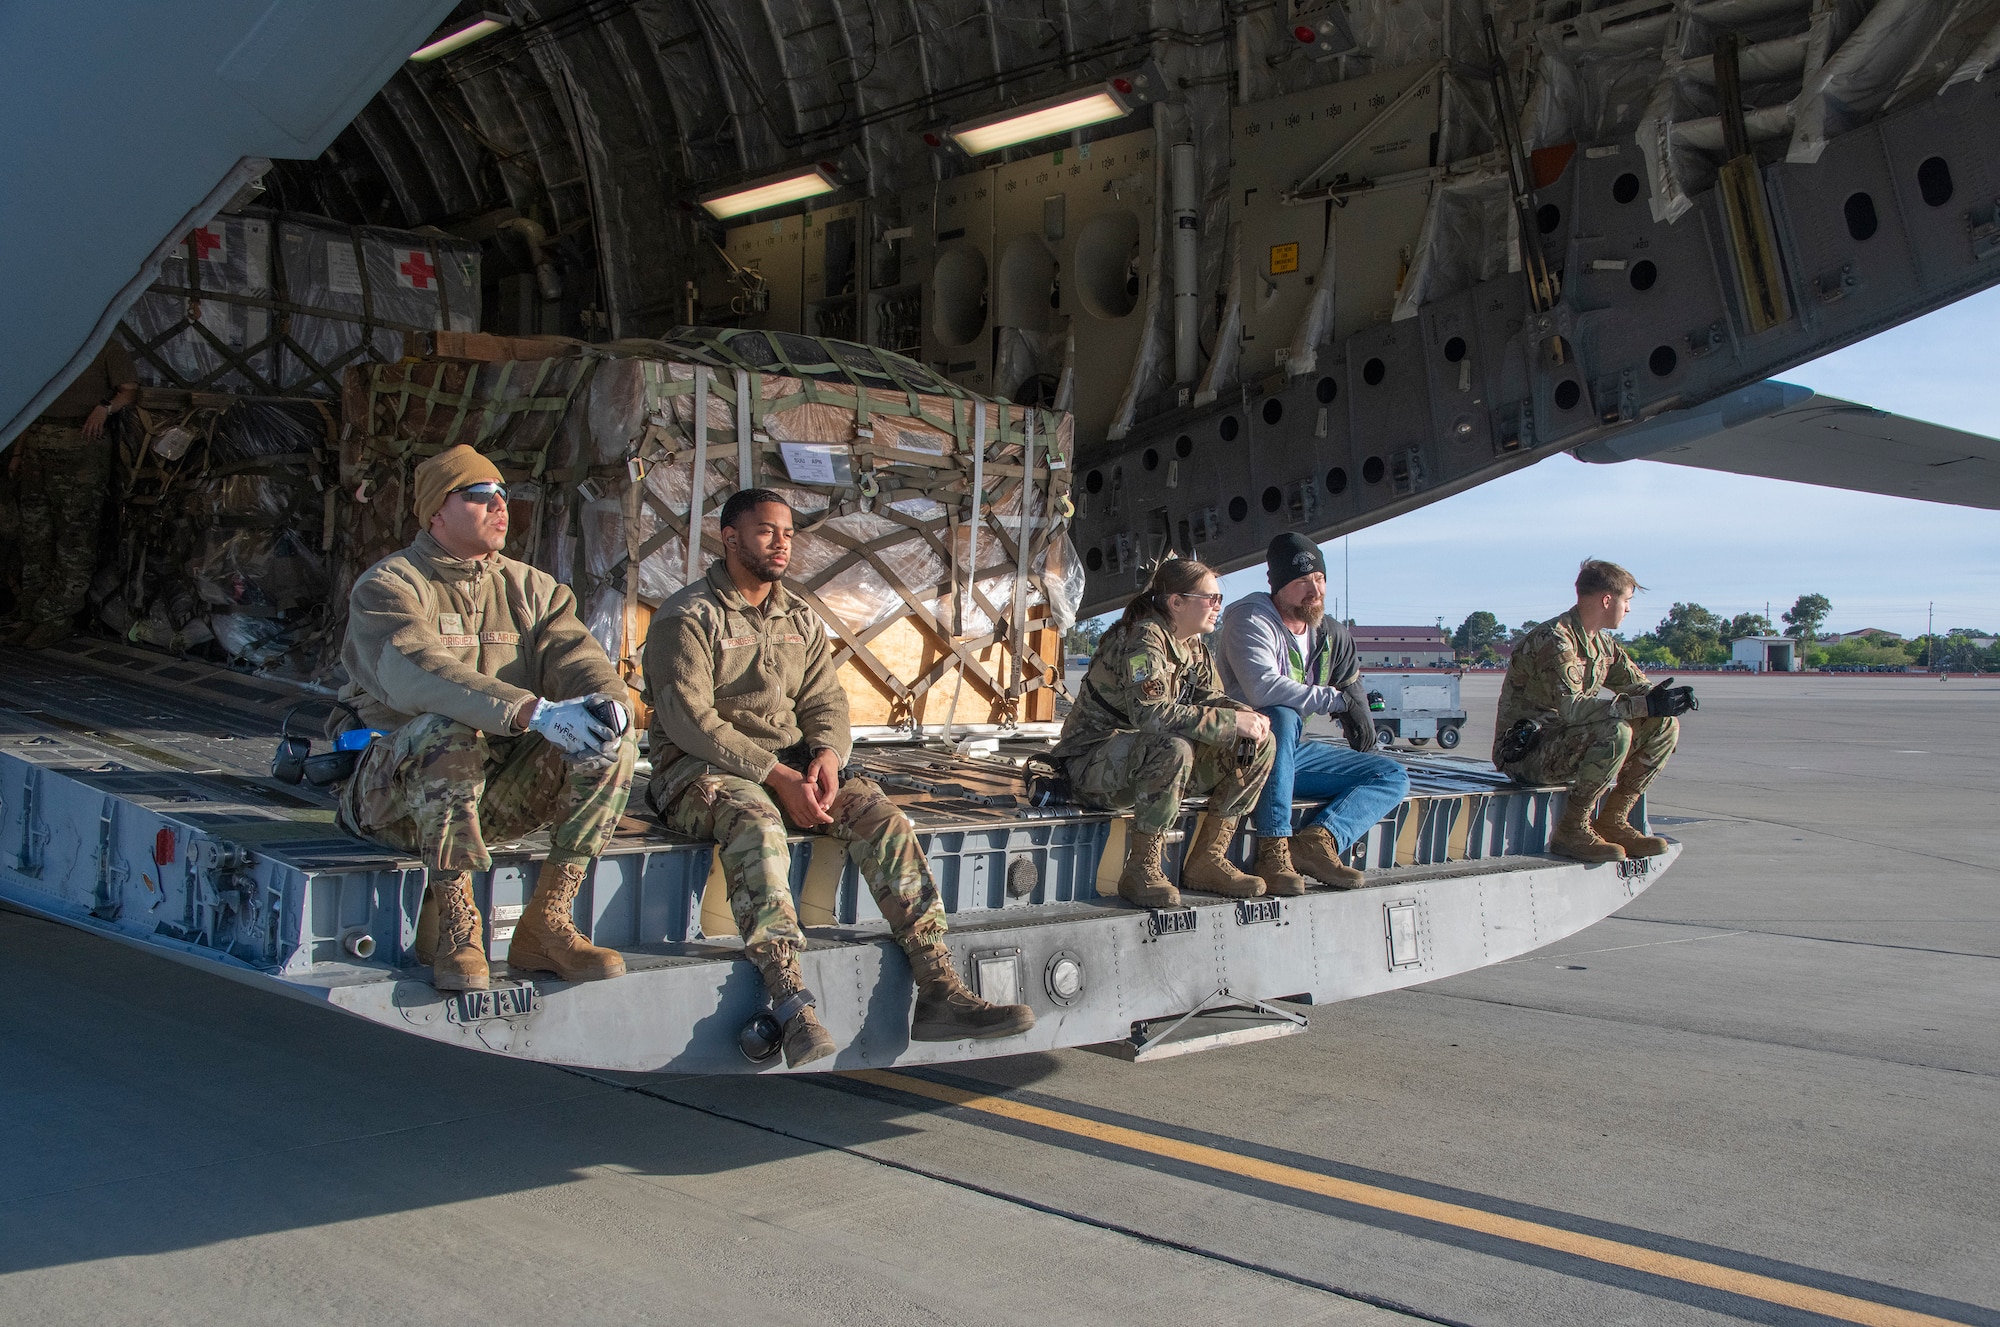 U.S. Airmen assigned to the 60th Aerial Port Squadron wait for the next load of cargo to be delivered during readiness exercise Roundel Perun 22-01, Travis Air Force Base, California, April 10, 2022. The base exercise was designed to enhance the capabilities of multiple squadrons in responding to possible real-world scenarios. (U.S. Air Force photo by Heide Couch)